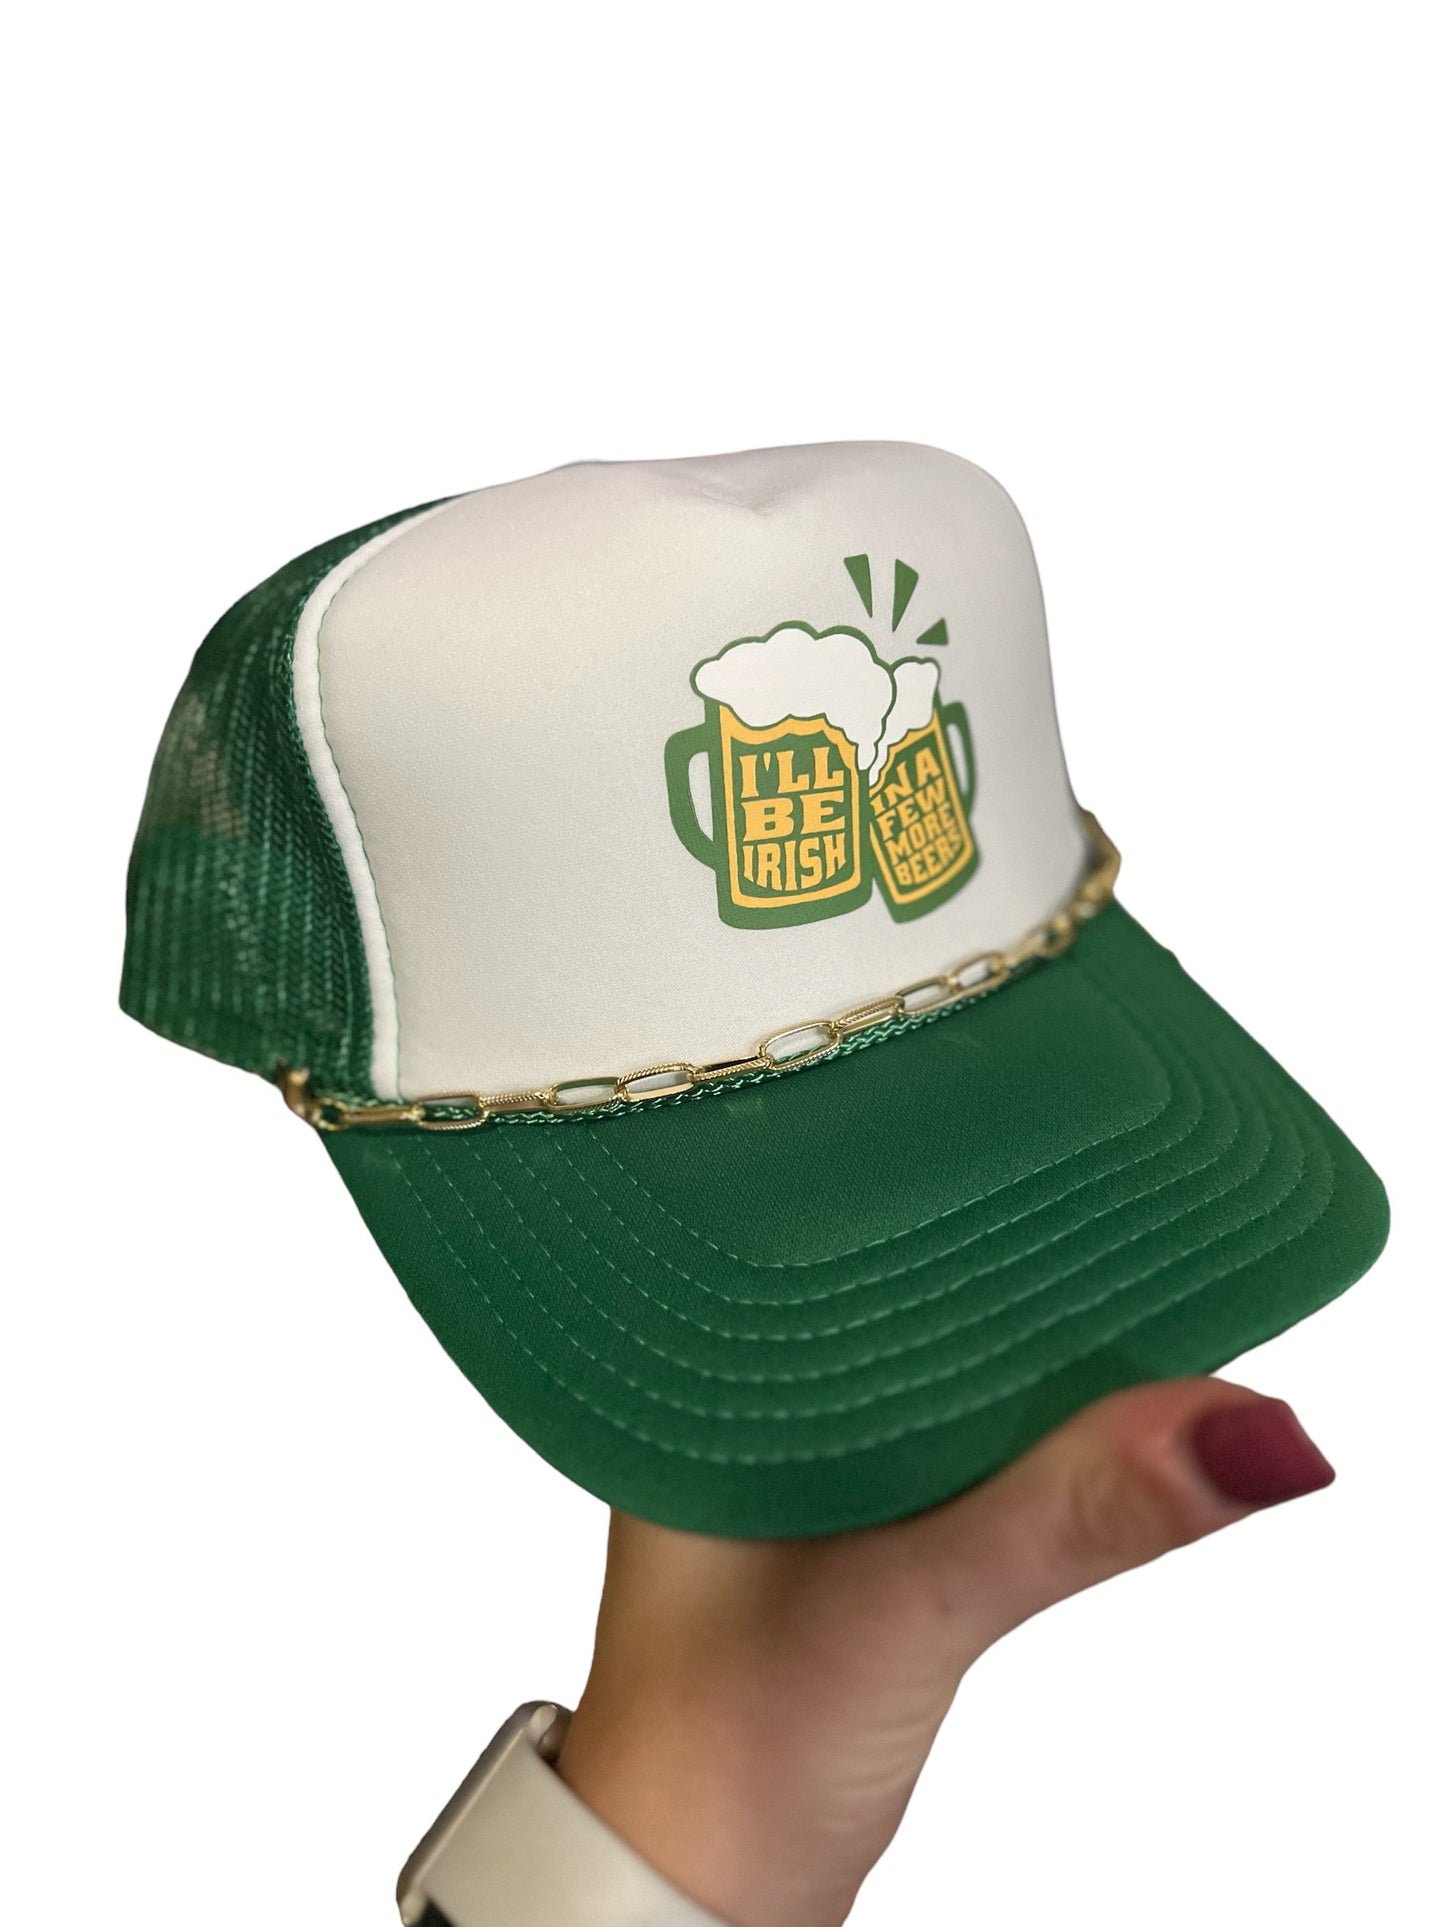 I’ll Be Irish In A Few More Beers Trucker Hat